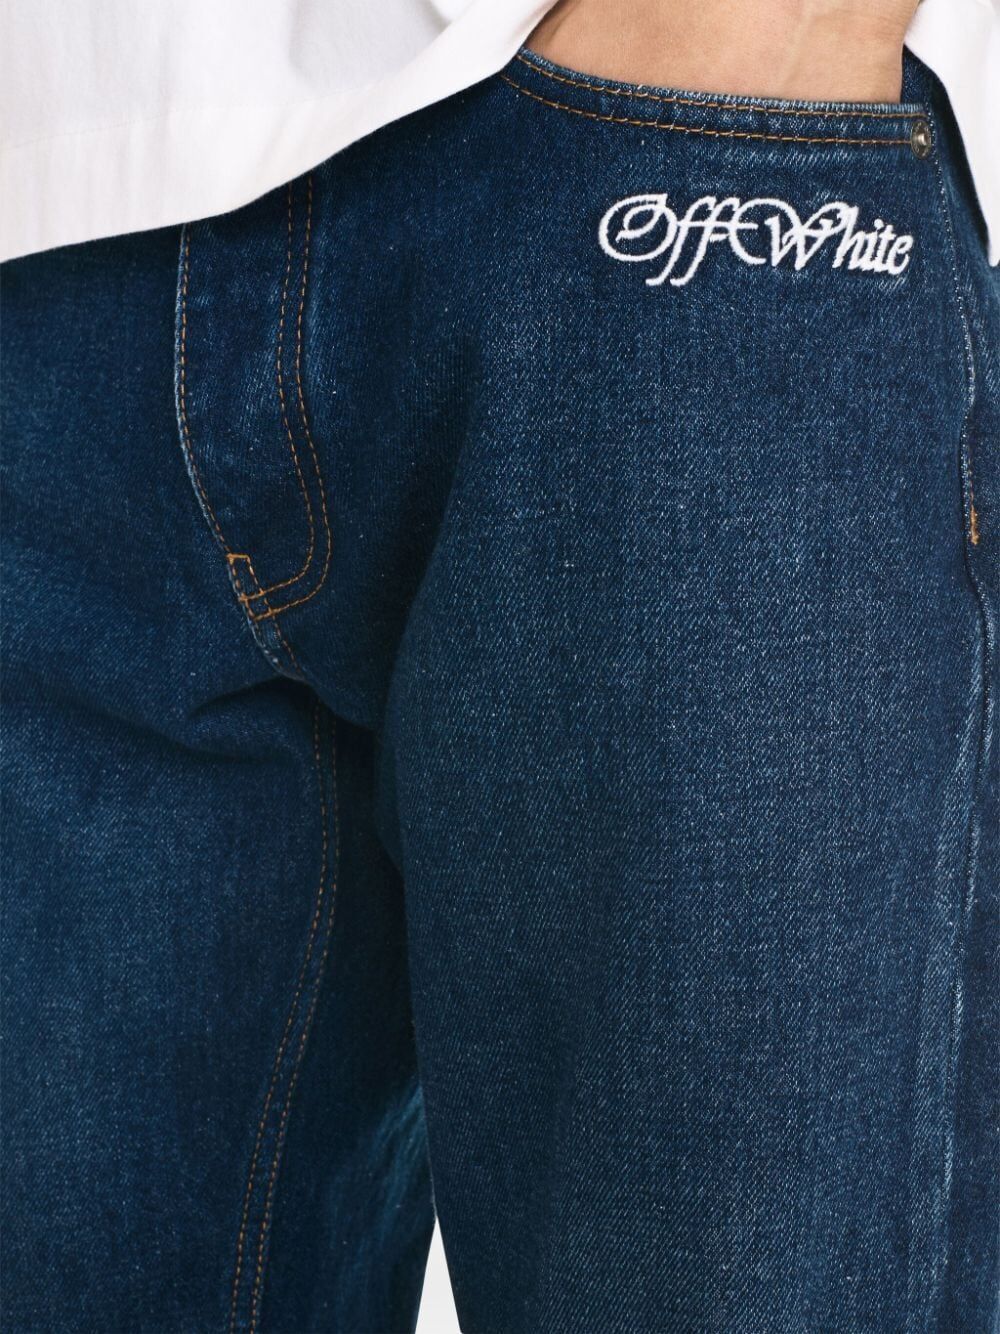 OFF-WHITE LOGO PATCH STRAIGHT LEG Jeans